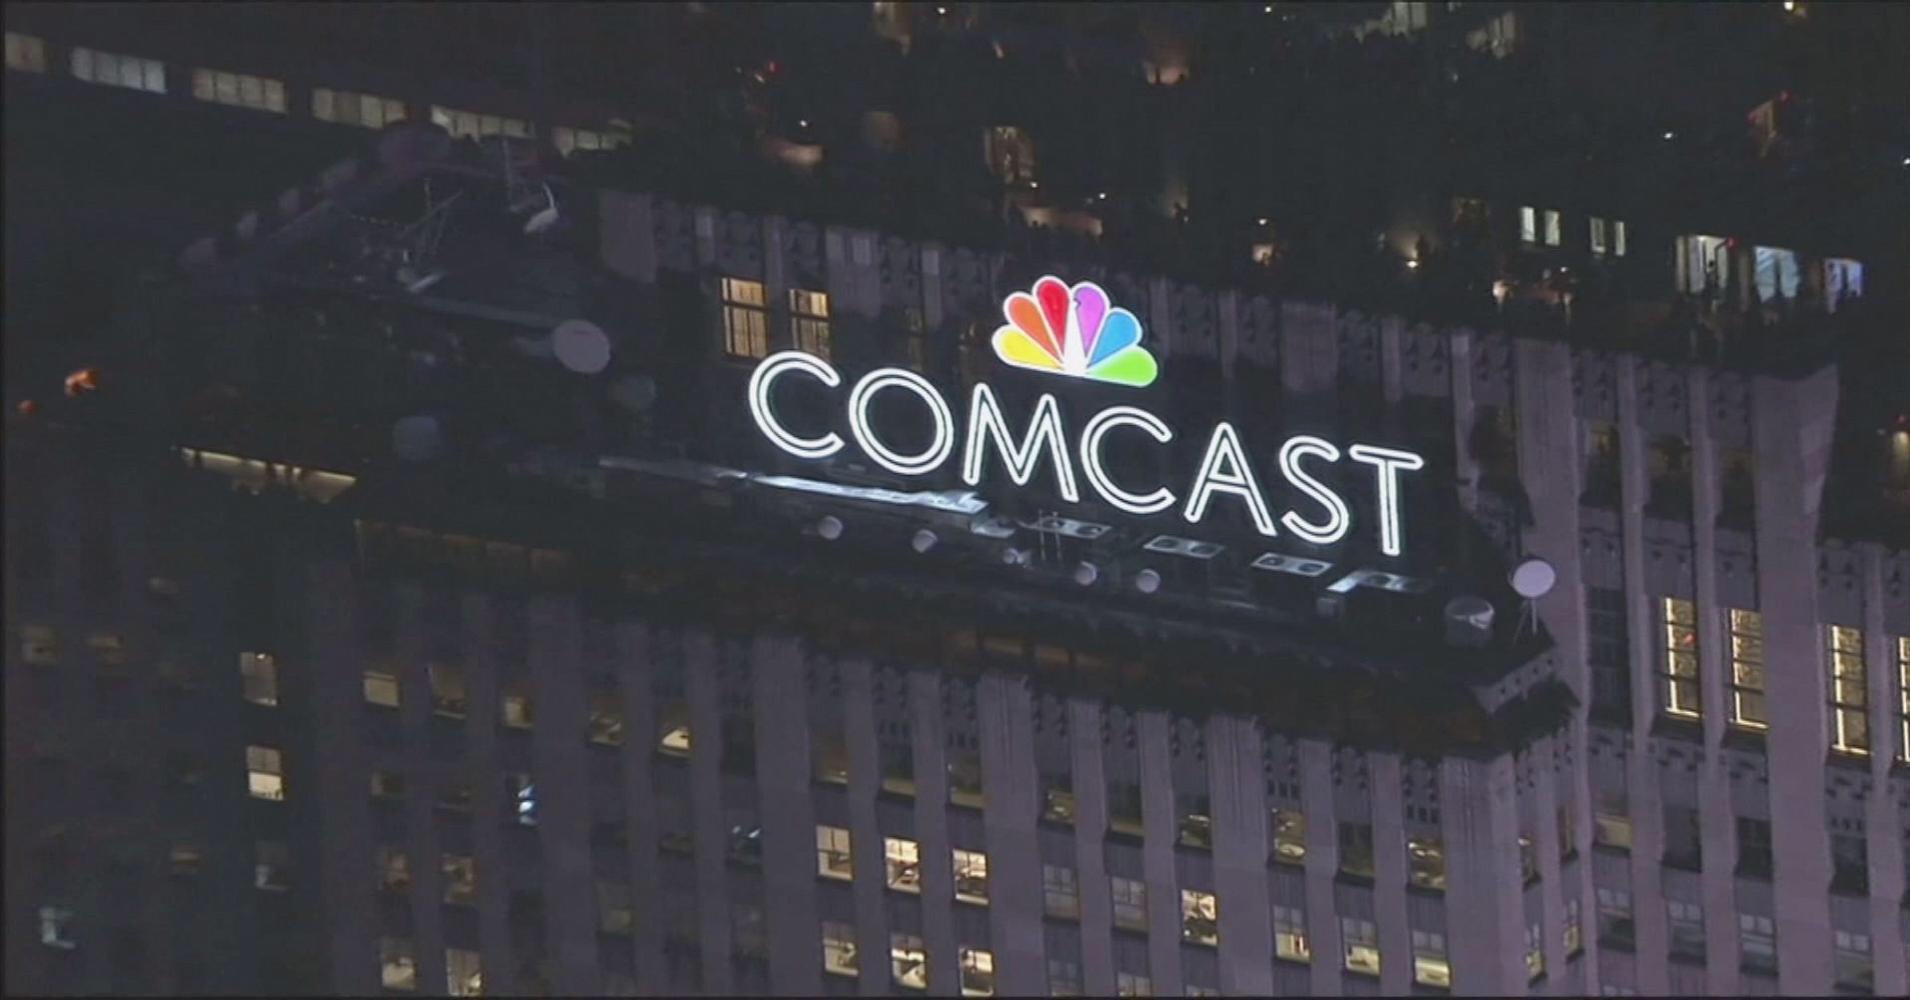 To celebrate the death of net neutrality, Comcast is giving its employees $1,000 bonuses